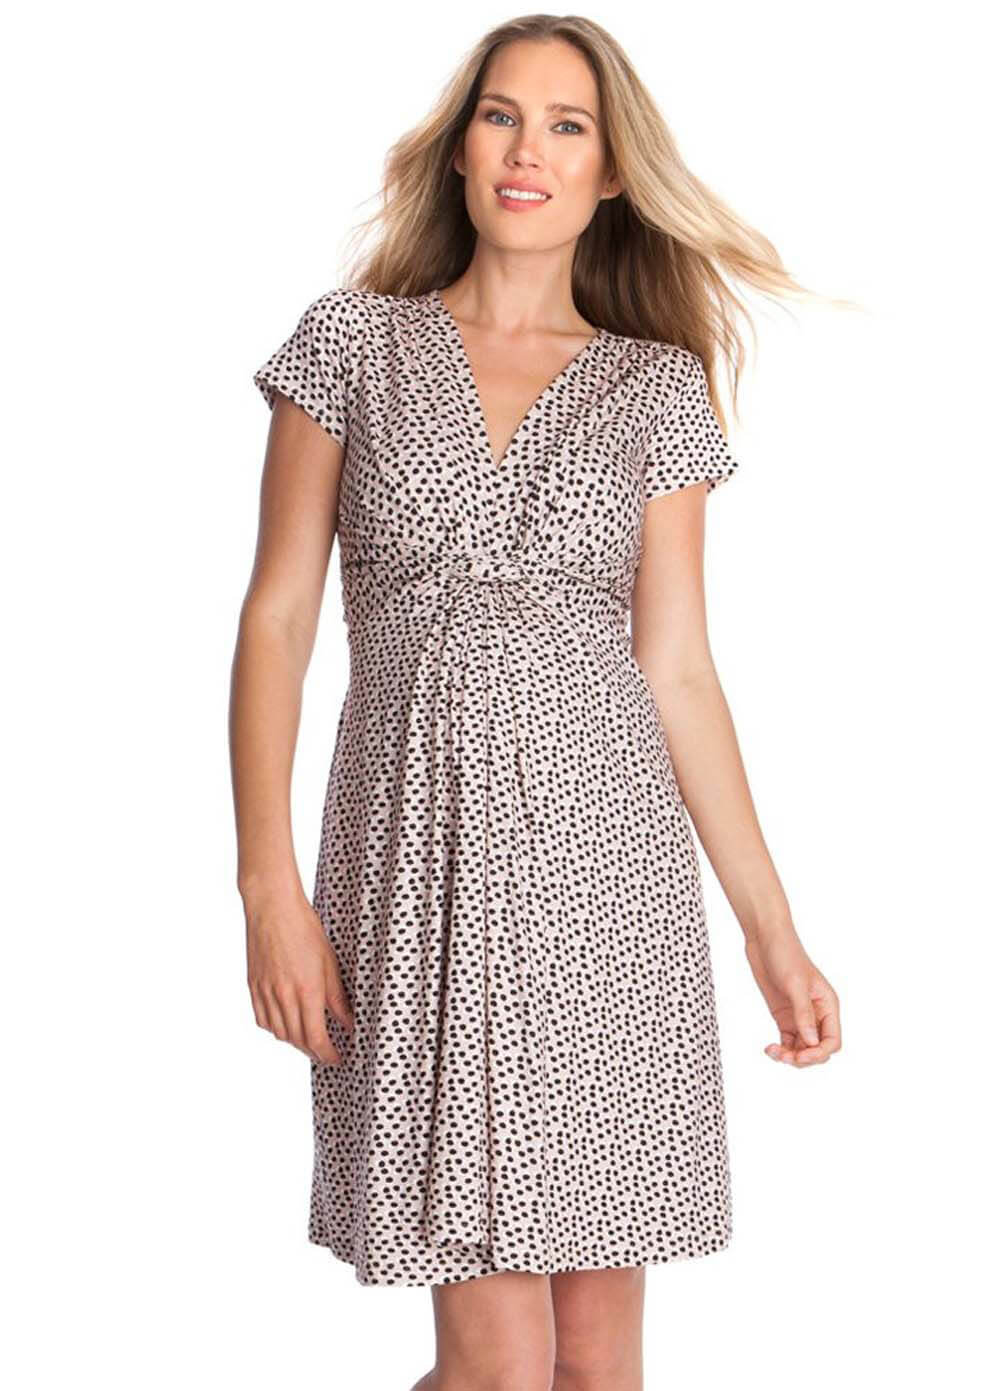 Pink Polkadot Front Knot Maternity Dress by Seraphine